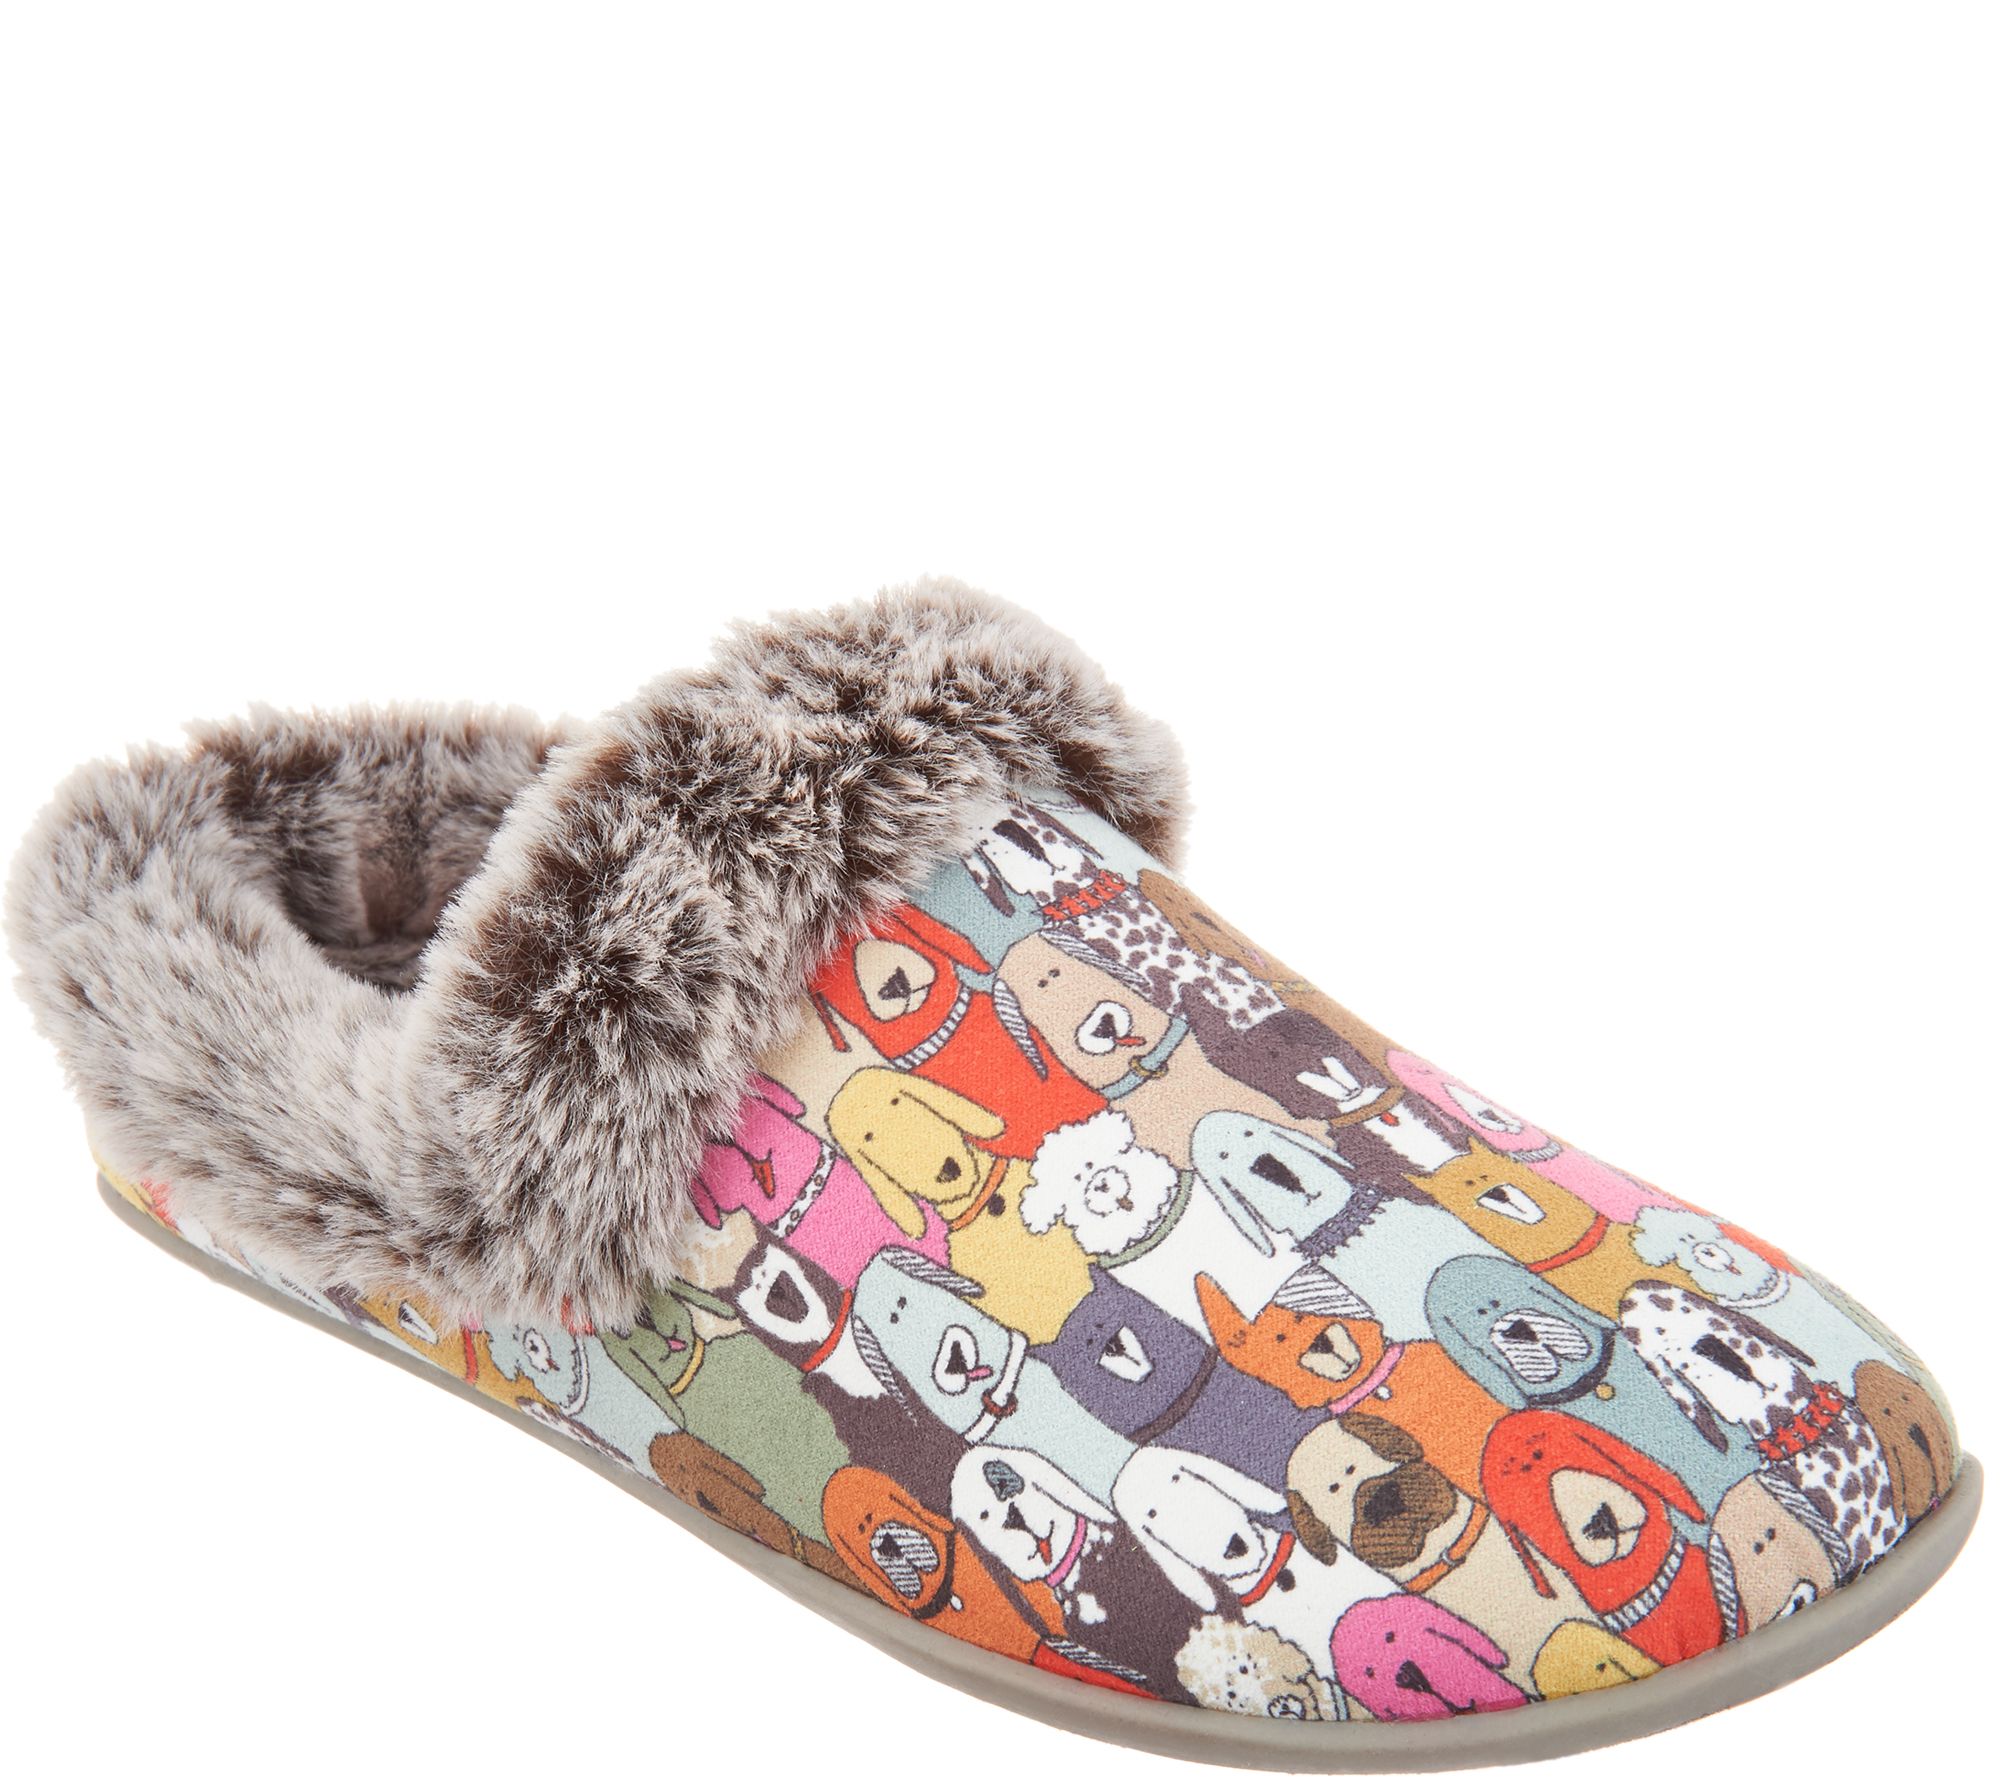 Skechers BOBS Clog Slippers - Wag Party 